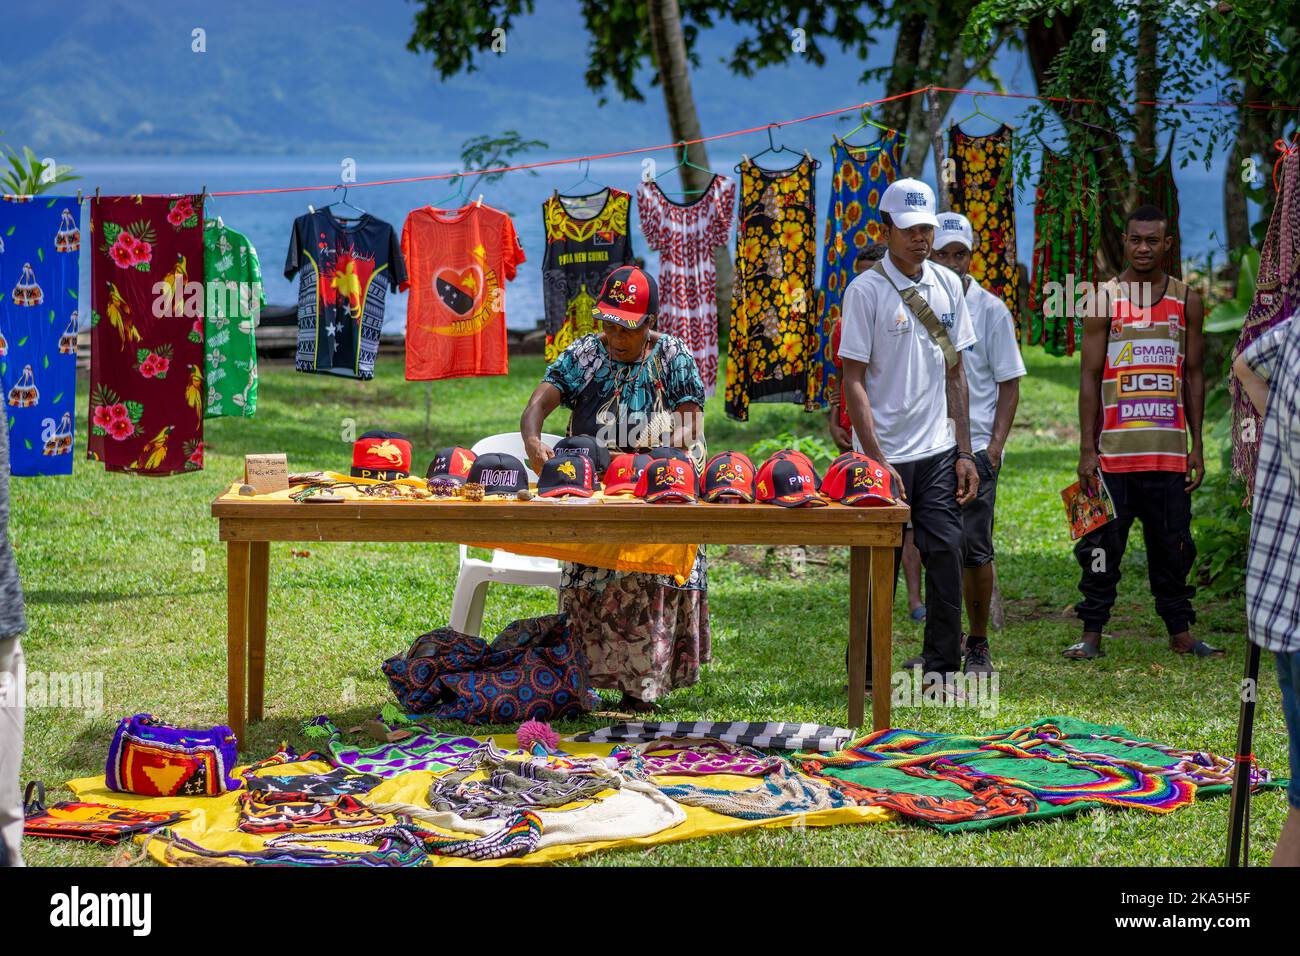 Stall holders selling and displaying various handmade crafts Alotau Cultural Festival, Alotau, Milne Bay Province, Papua New Guinea Stock Photo